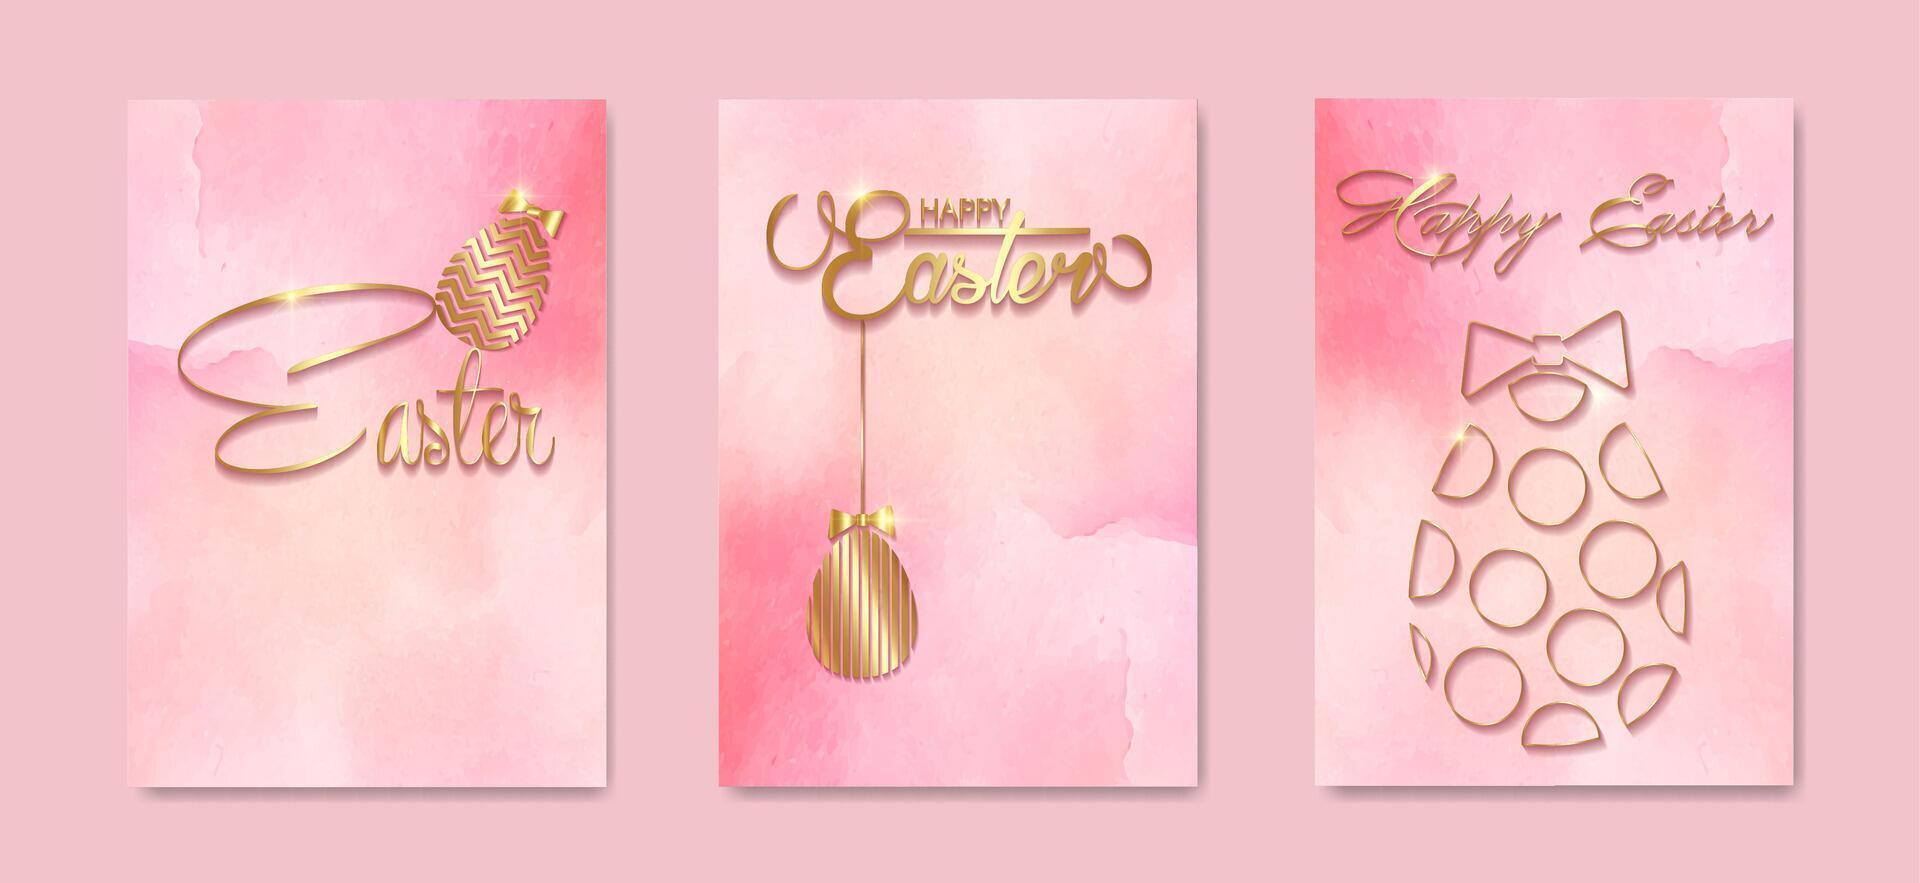 set card Happy Easter gold texture, luxury pink watercolor background. Easter holiday invitations templates collection with hand drawn lettering and gold easter eggs. fashion illustration vector